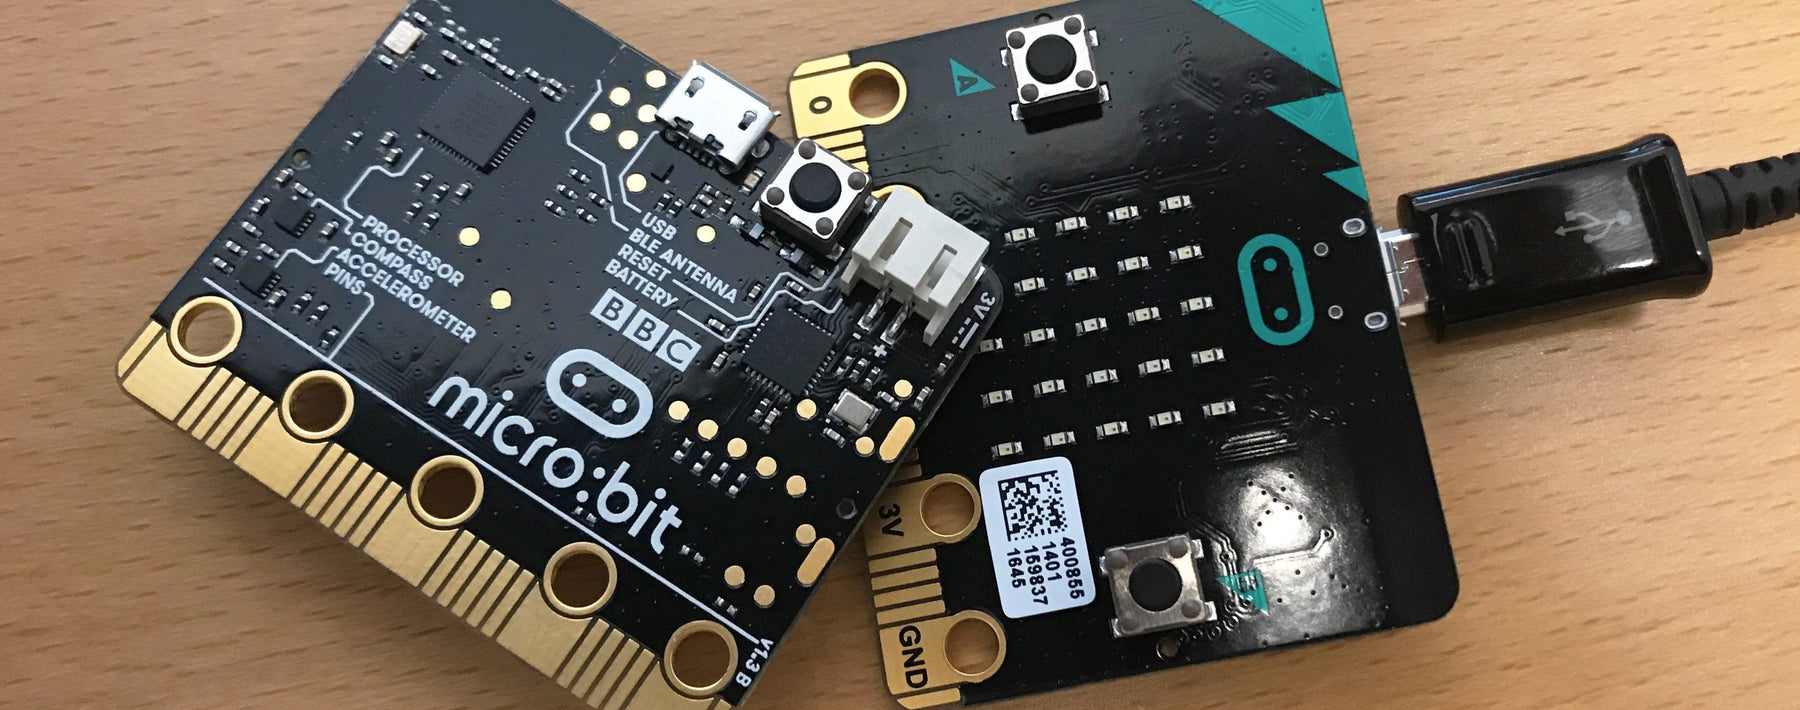 Create your own Electronic Dice with the BBC micro:bit